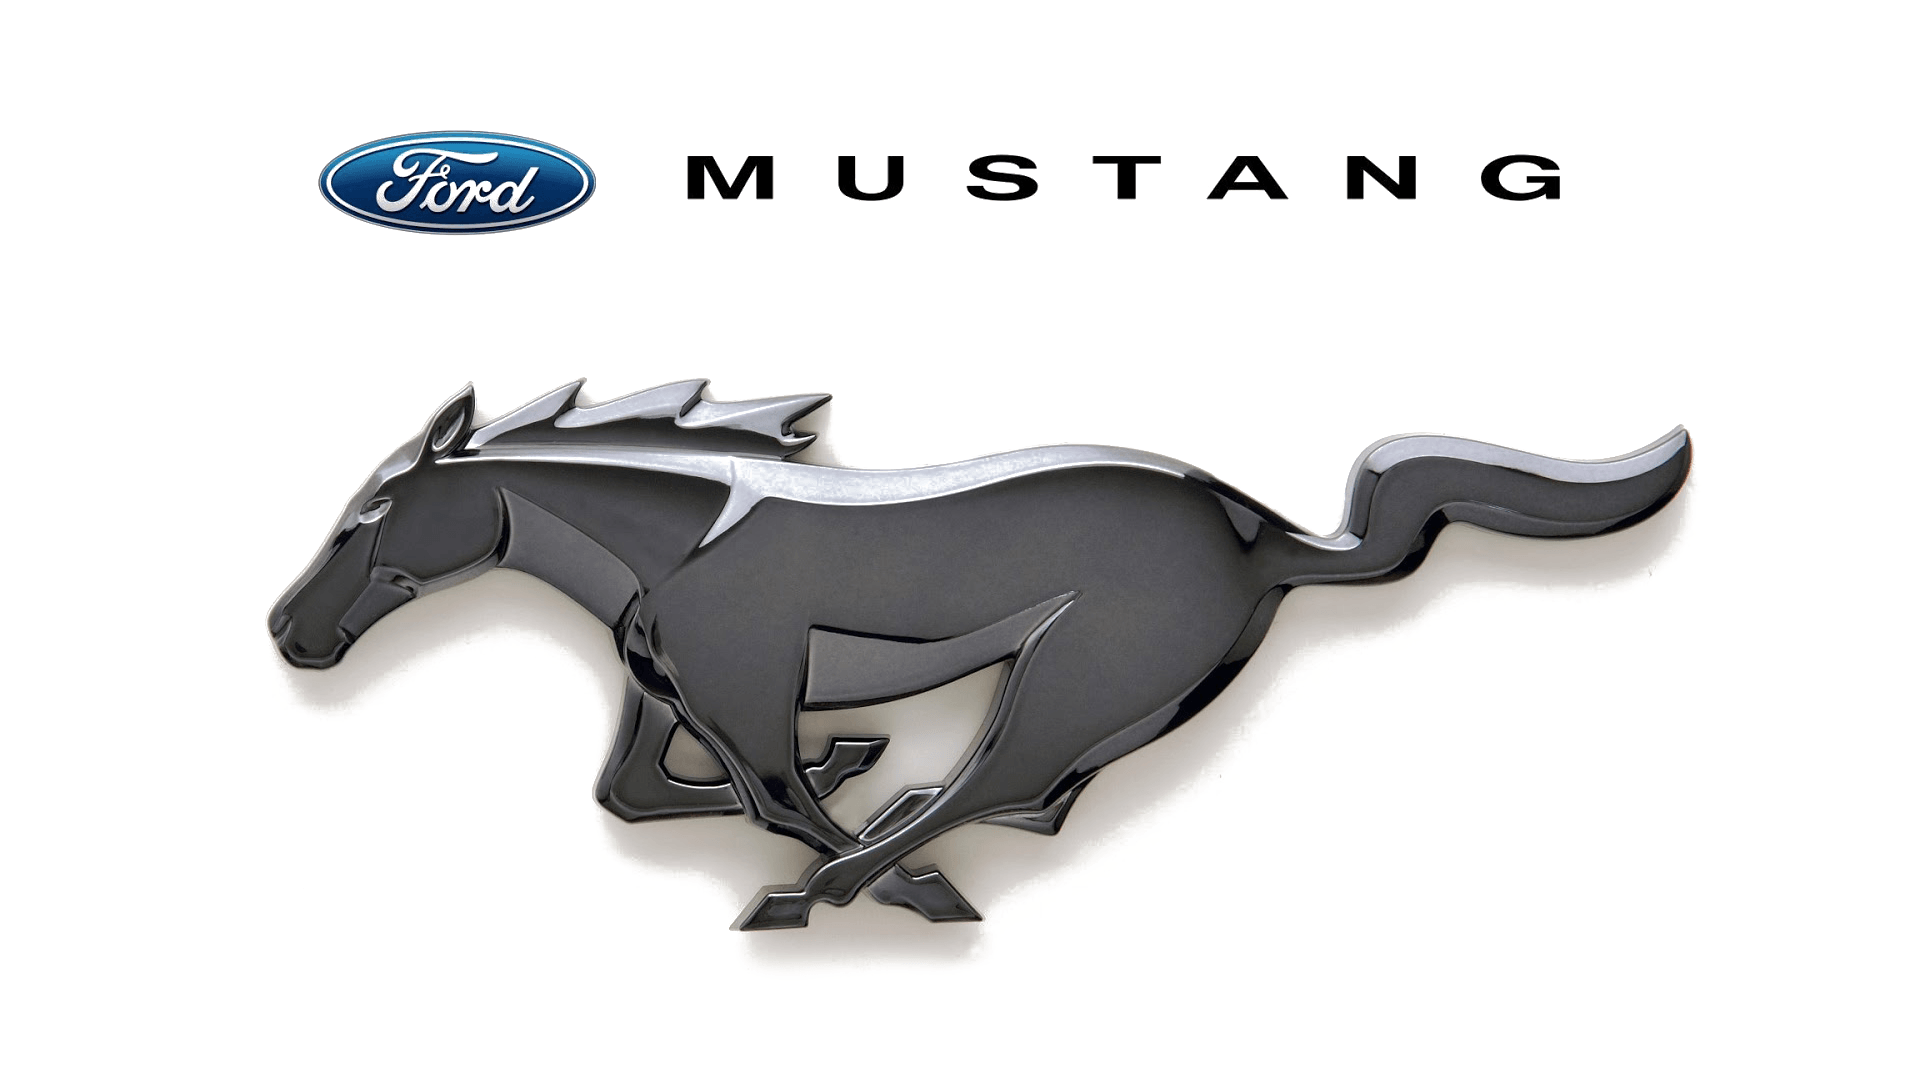 Mustang Logo, Meaning, Information